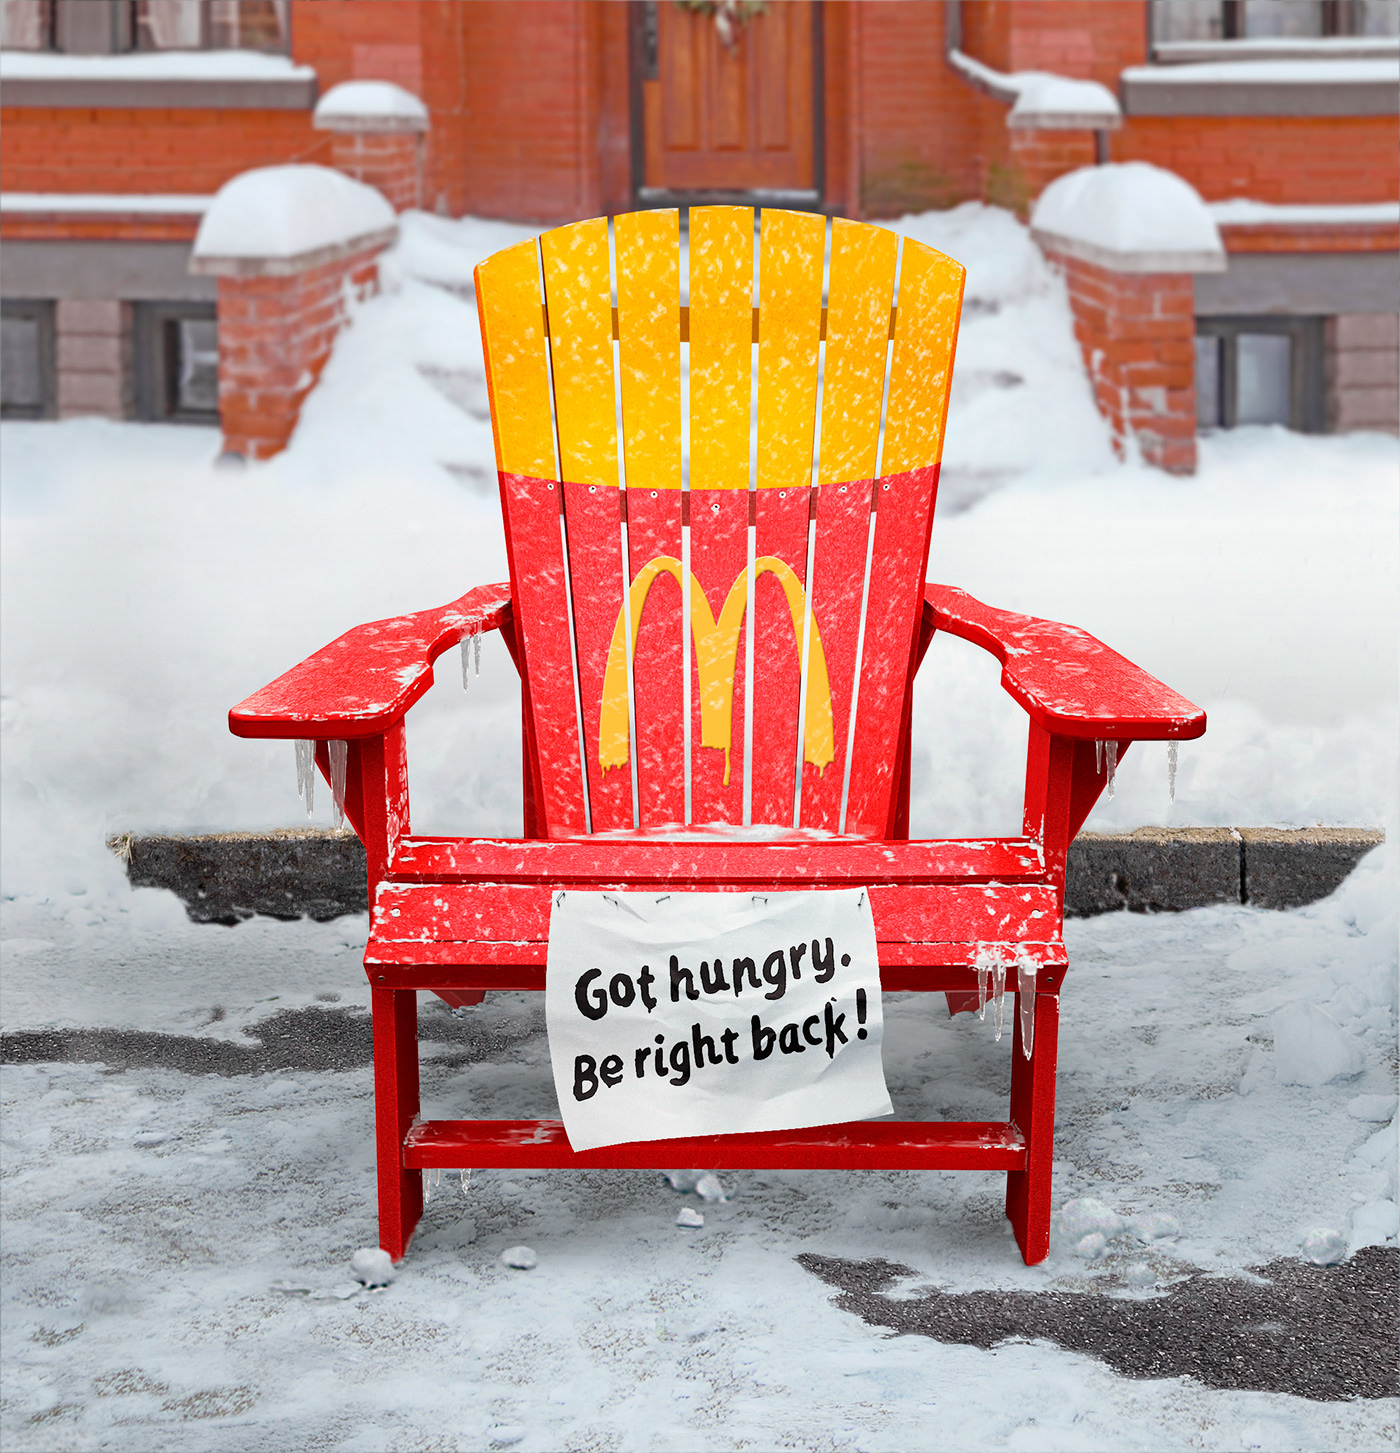 CGI chair chicago dibs Fries icicles snow Fast food mcdonald's